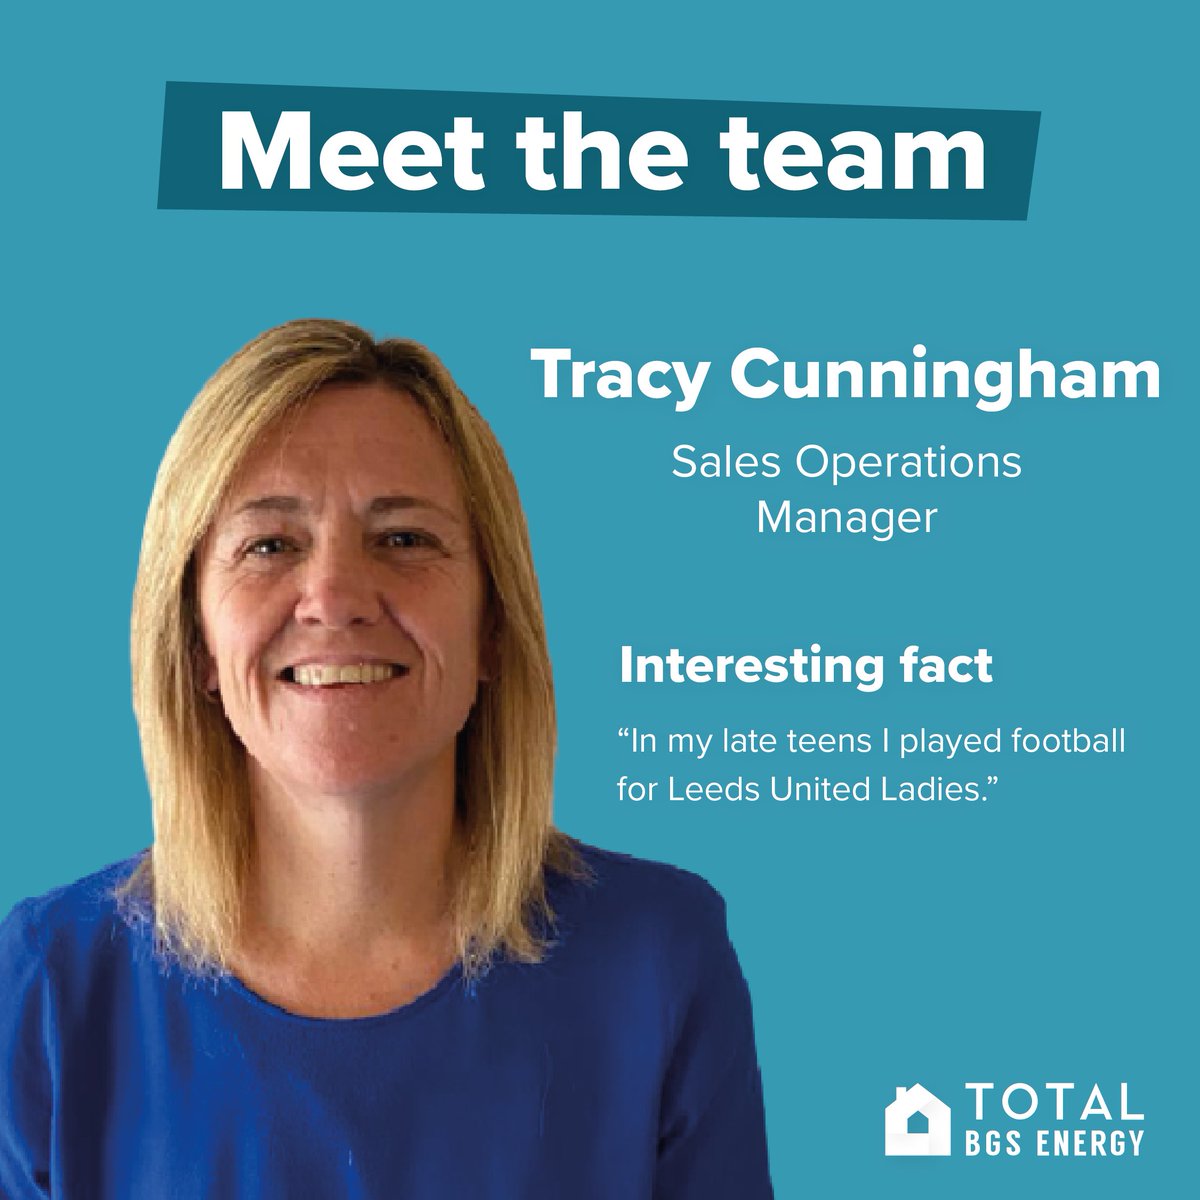 🌟 Meet Tracy Cunningham: Our Sales Operations Maestro! 

Tracy Cunningham has over 20 years of experience in the energy industry. 💼 She considers herself fortunate to meet new people every day and loves the exciting nature of her work.

#MeetTheTeam #IndustryVeteran #UkBusiness